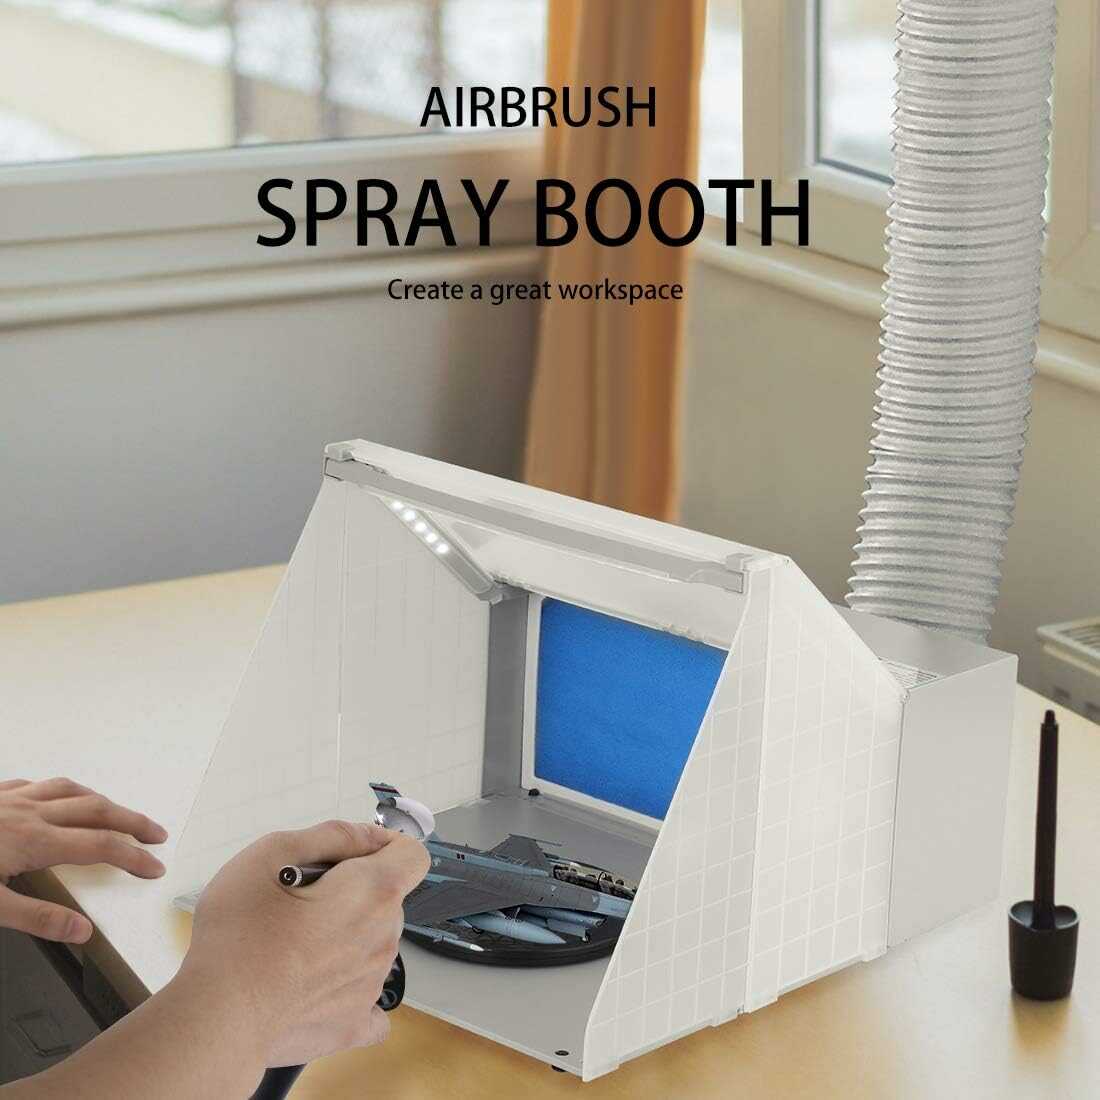 VIVOHOME Airbrush Paint Spray Booth Kit with 3 LED Lights Turn Table and Filter Hose